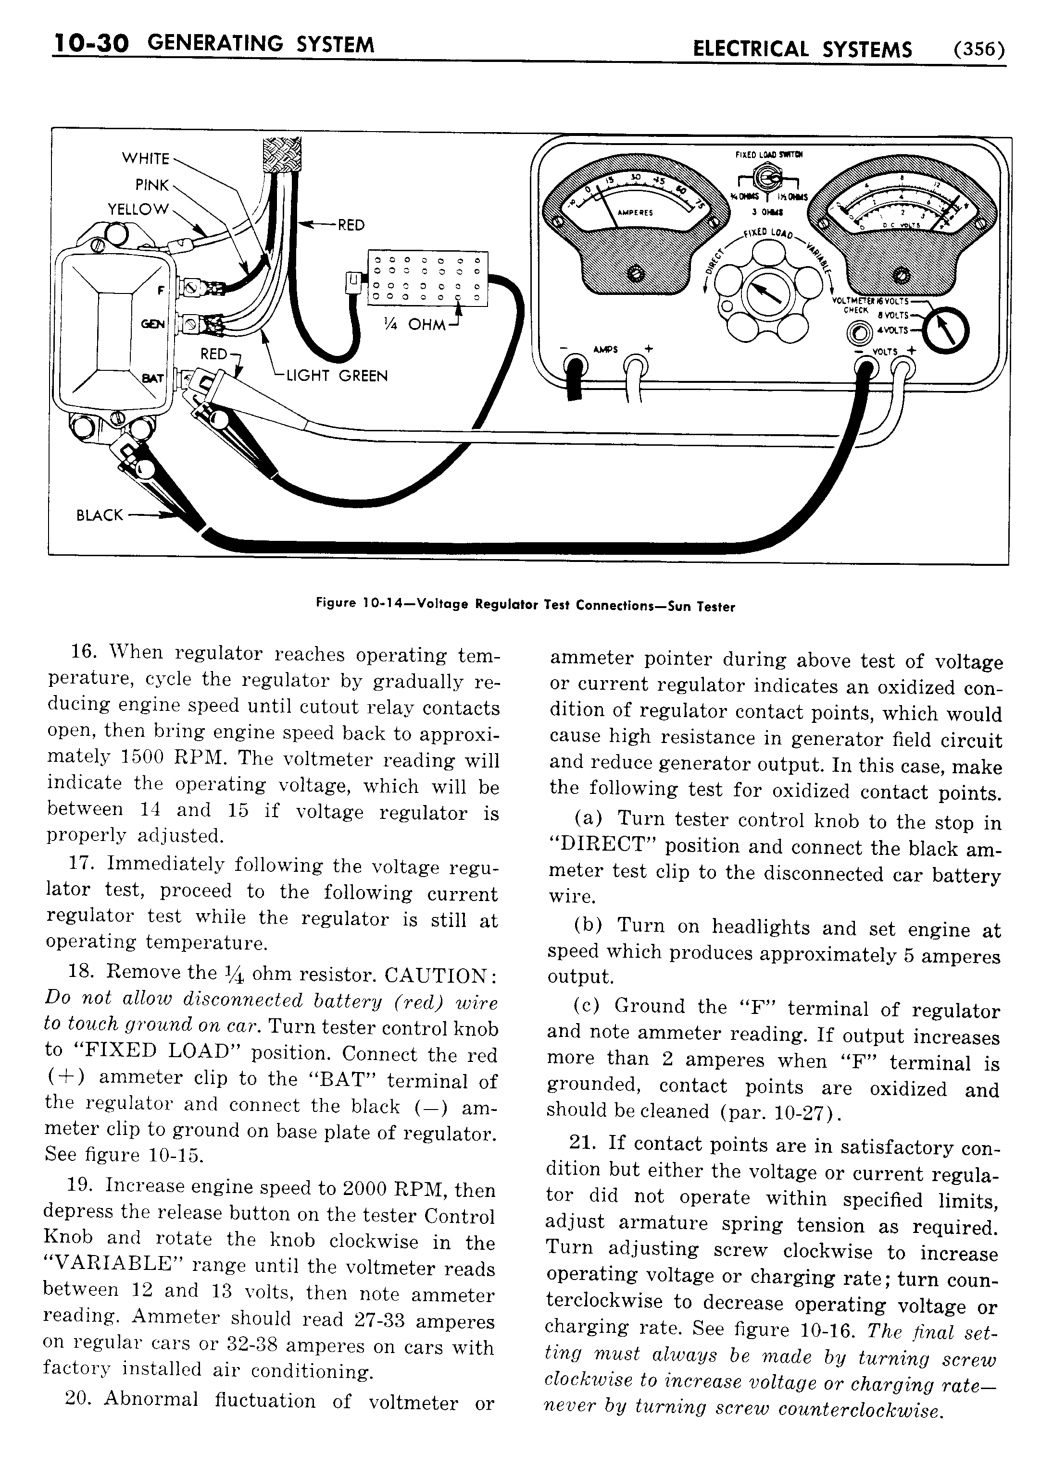 n_11 1956 Buick Shop Manual - Electrical Systems-030-030.jpg